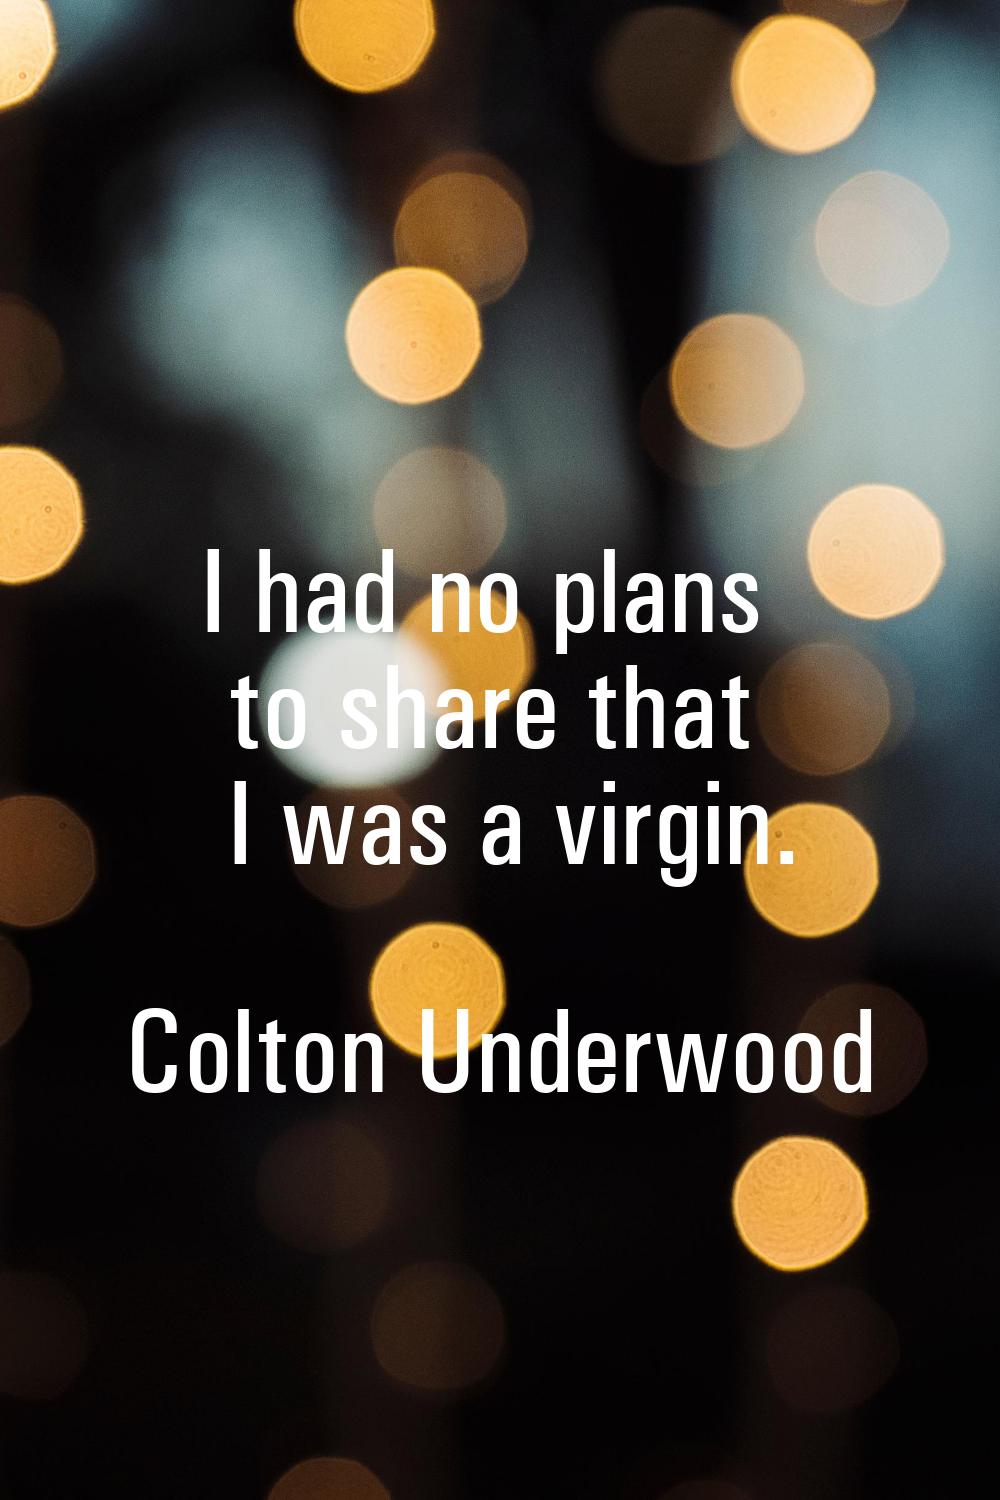 I had no plans to share that I was a virgin.